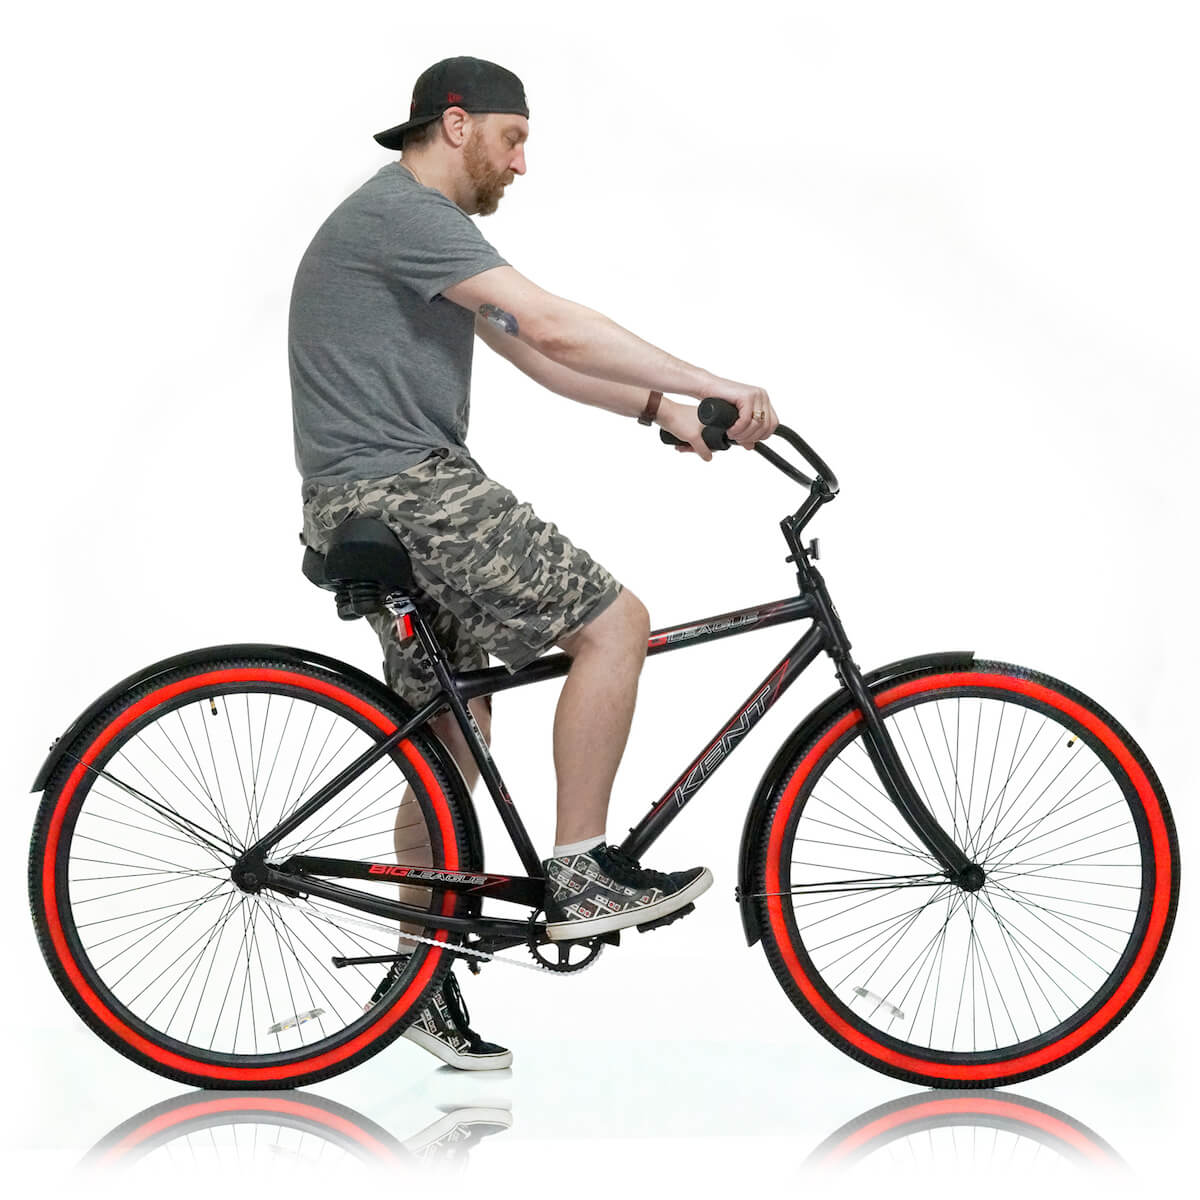 online contests, sweepstakes and giveaways - Bicycle Giveaways (April 2021) - Join Now! | BikeRide